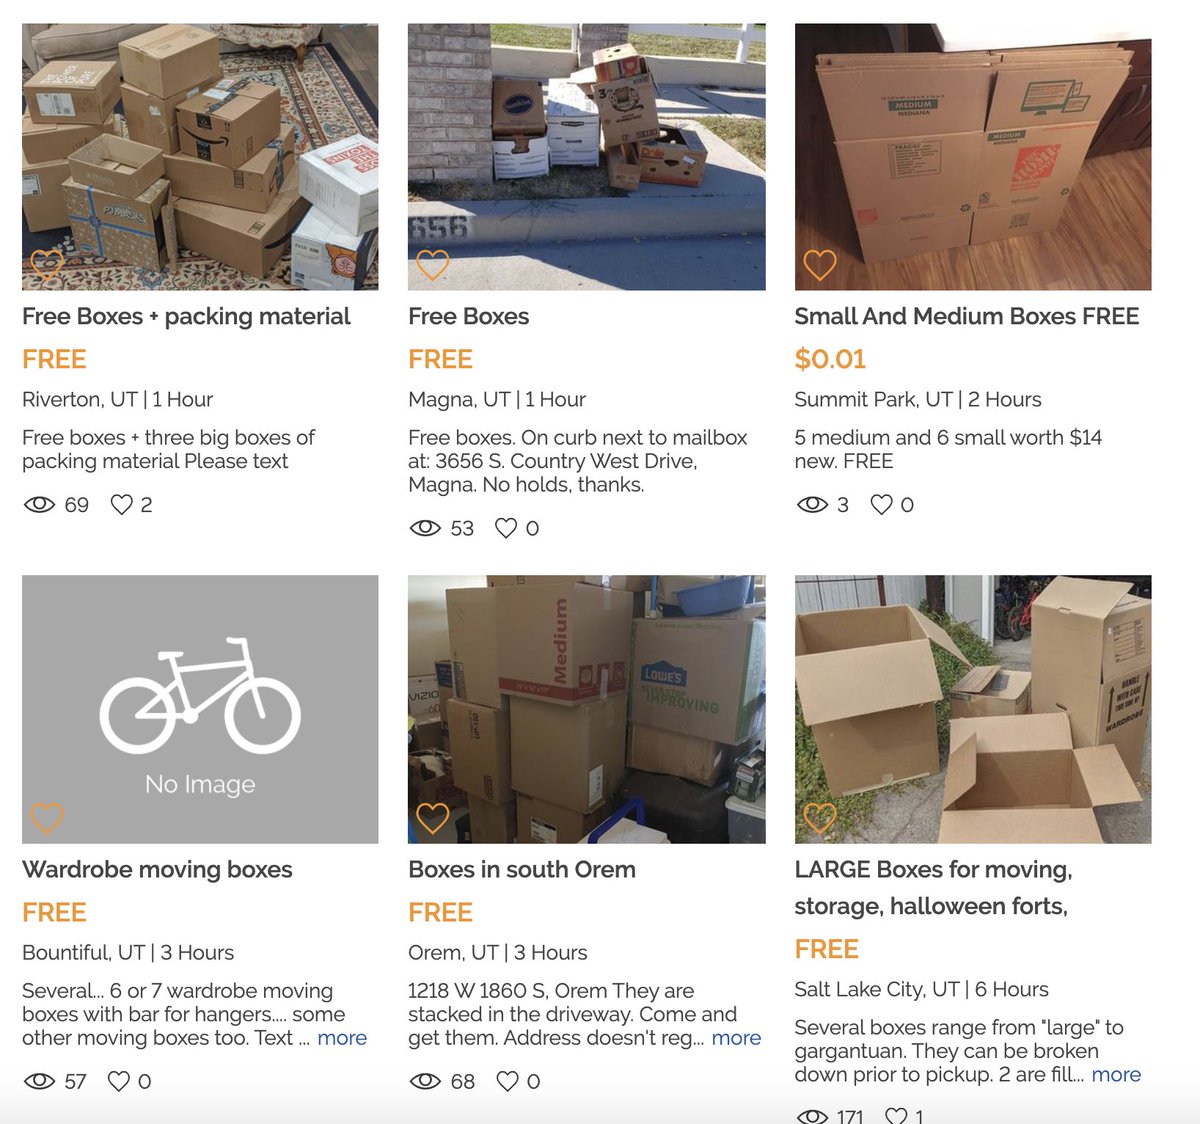 Boxes:I have never paid for boxes.I ask family members to save their Amazon boxes for me.I also look for free boxes on Facebook & classifieds pages.